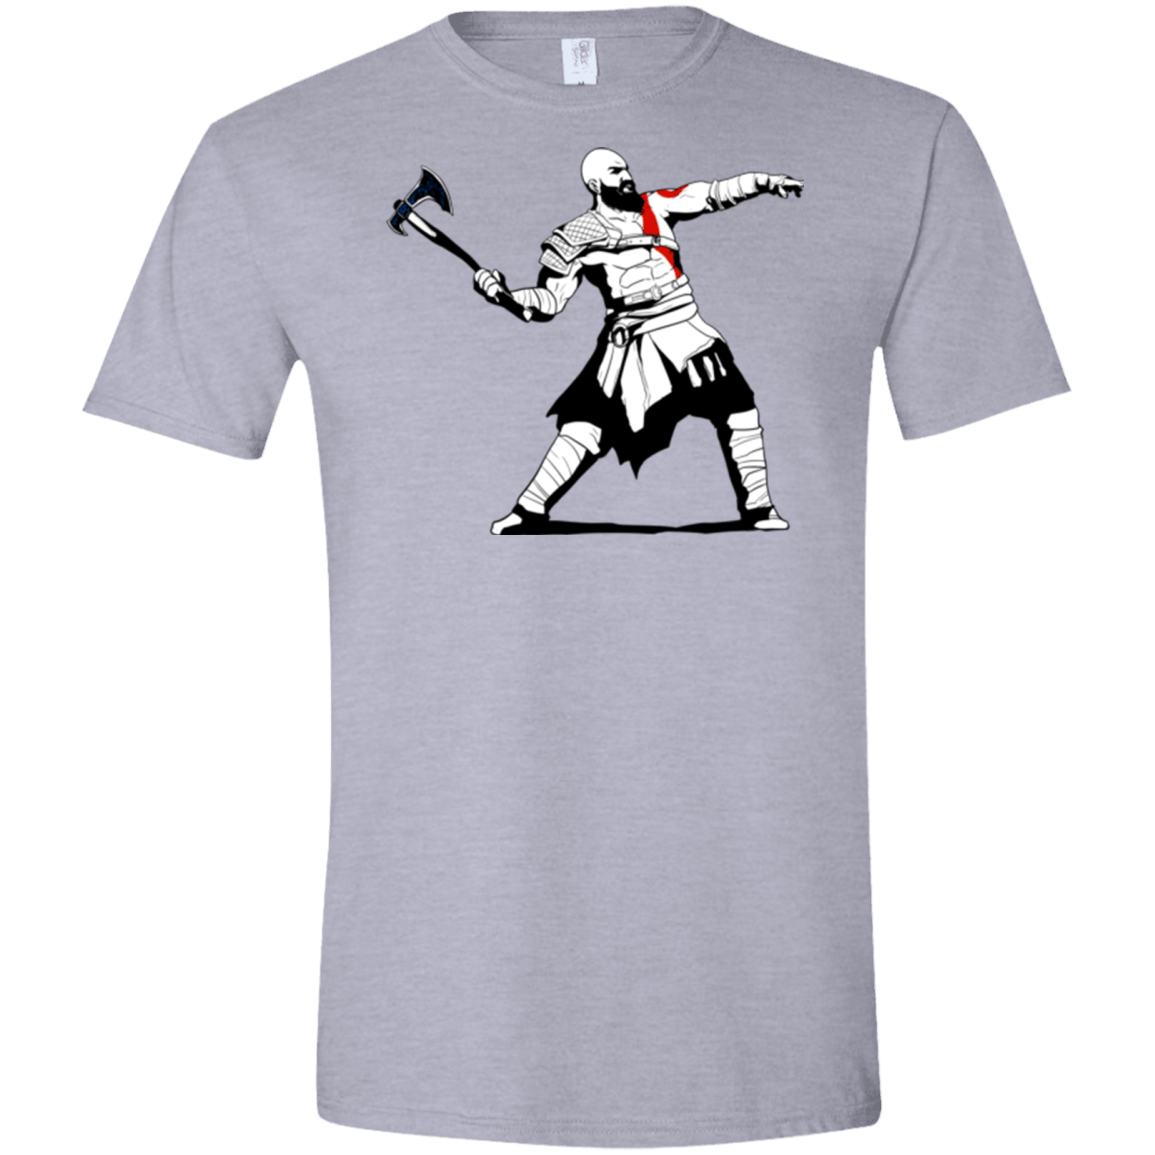 T-Shirts Sport Grey / X-Small Kratos Banksy Men's Semi-Fitted Softstyle